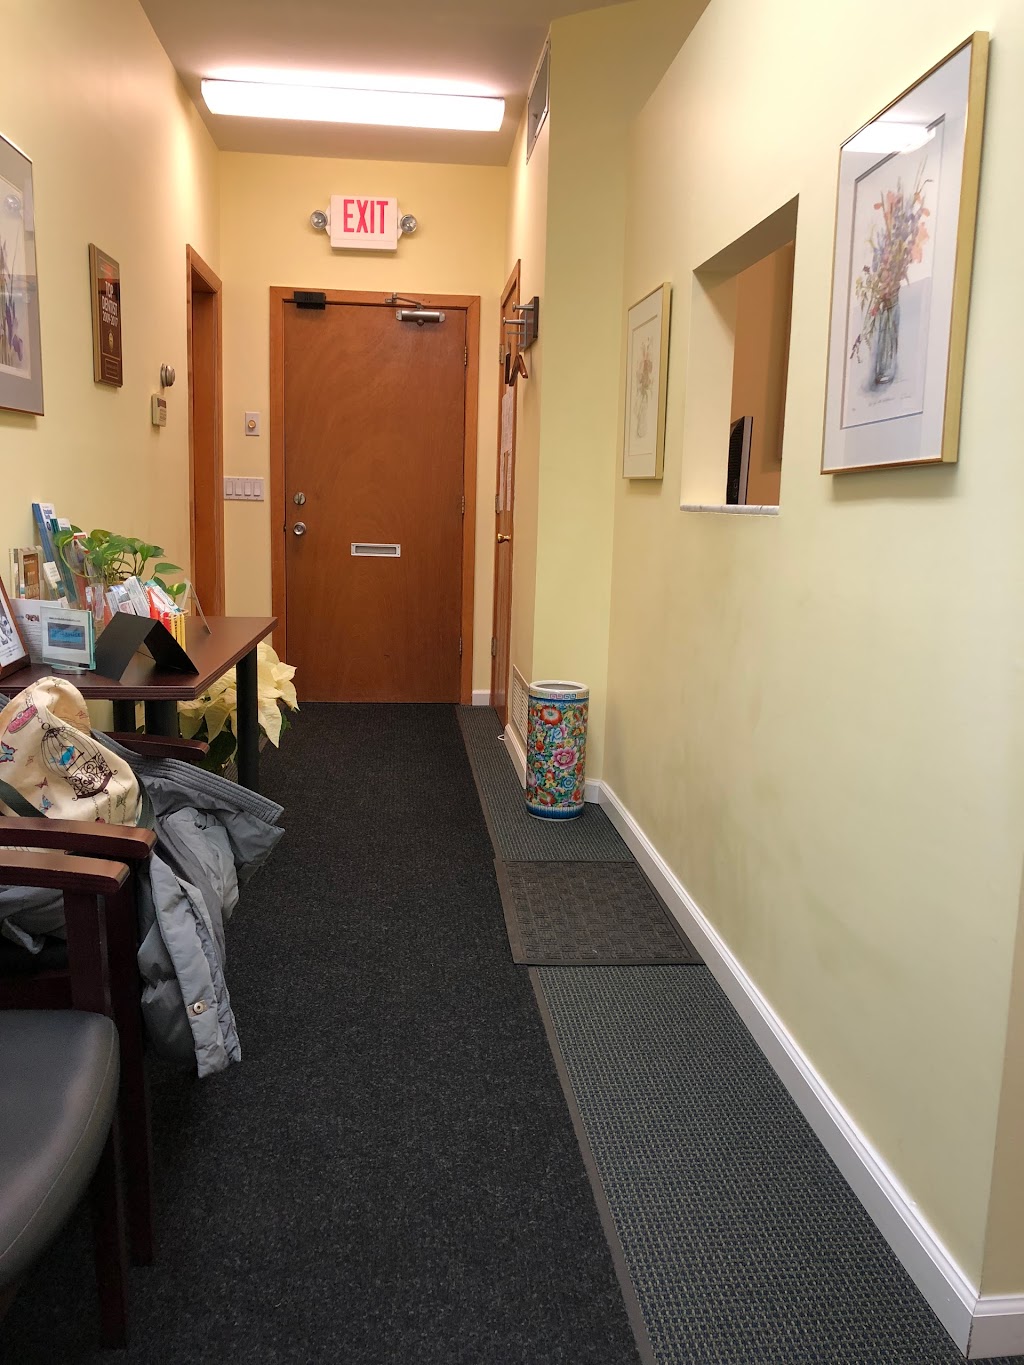 Valley Endodontics | 425 N State Rd # 1, Briarcliff Manor, NY 10510, USA | Phone: (914) 762-0990